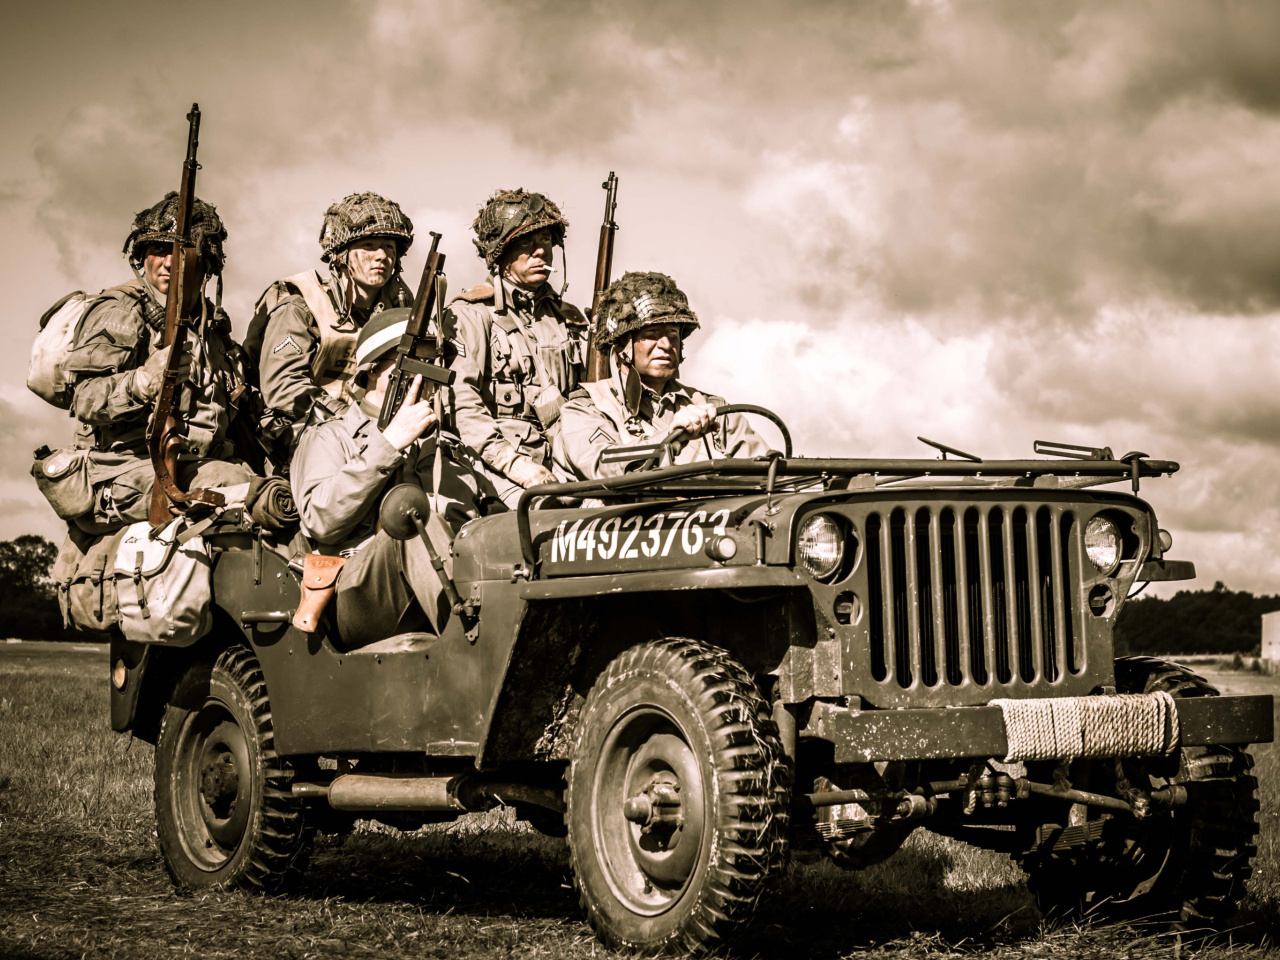 Soldiers on Jeep wallpaper 1280x960